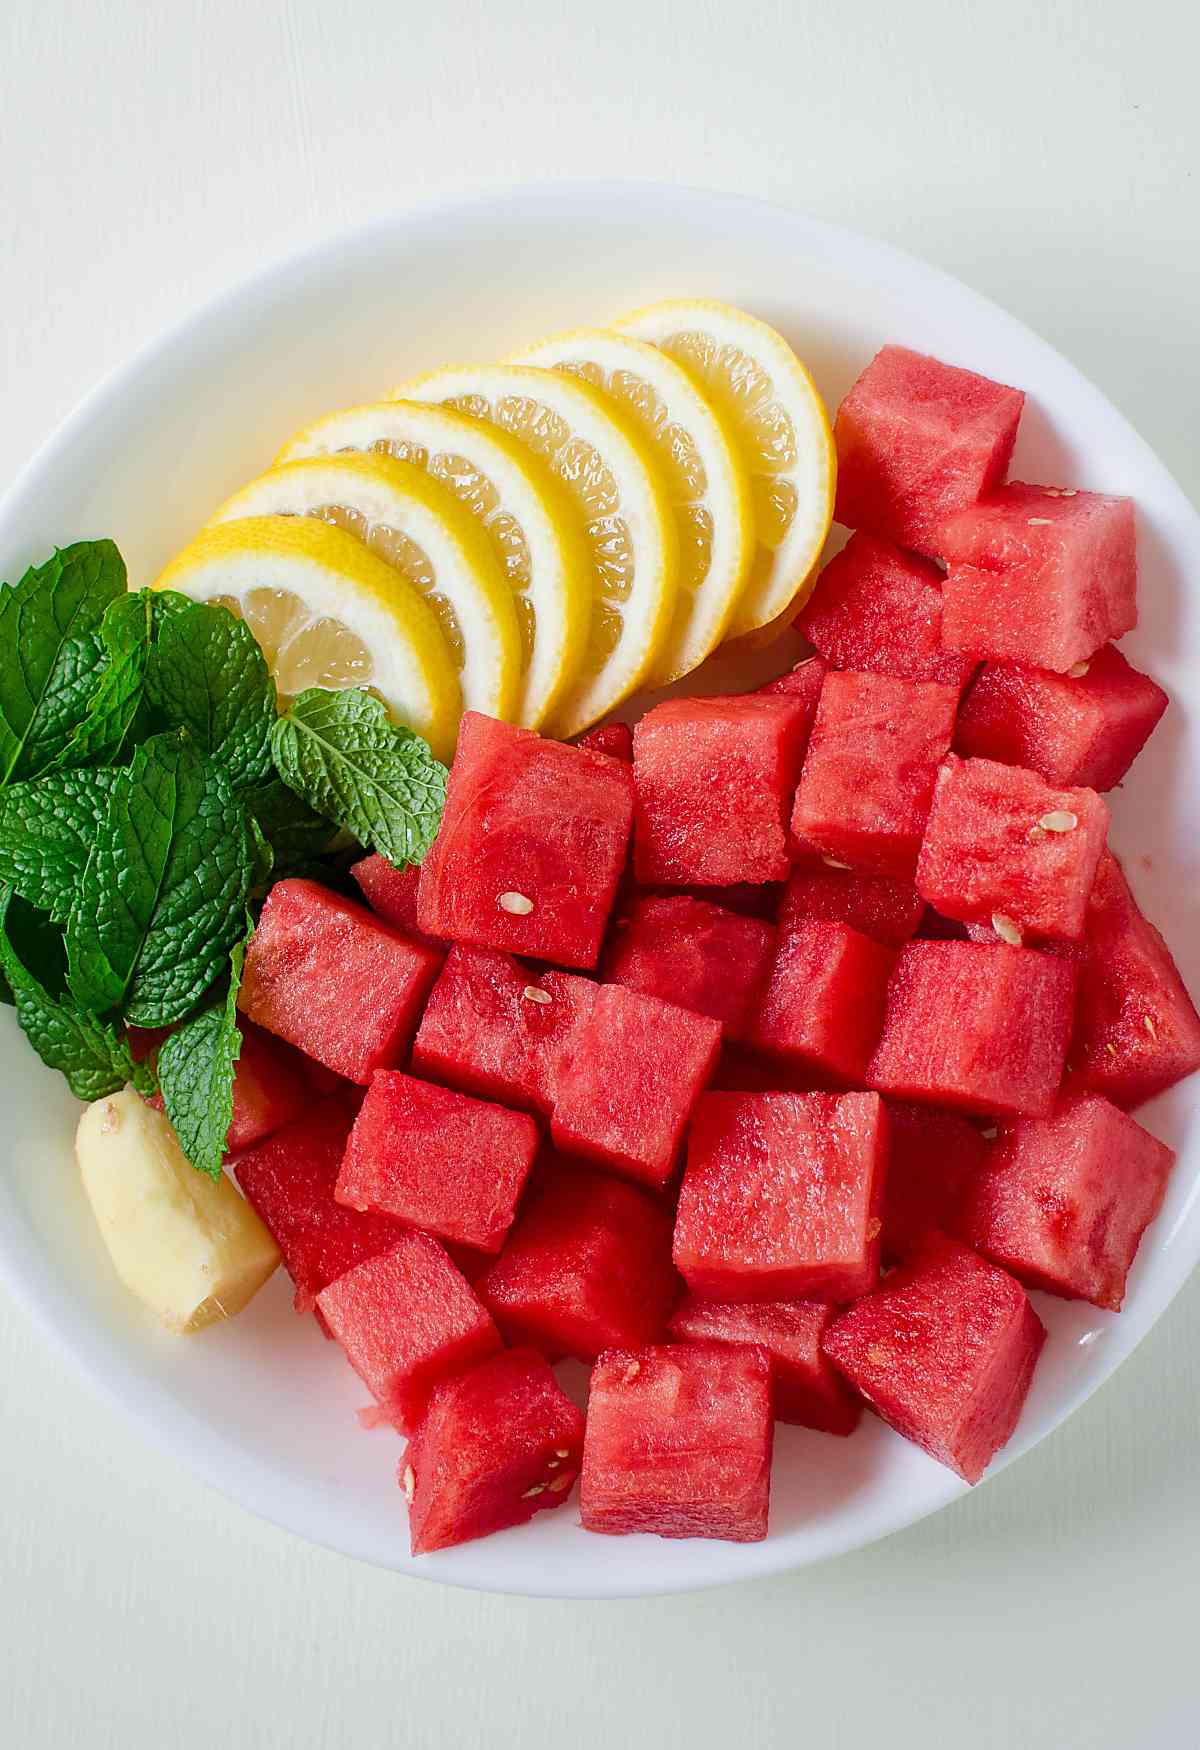 
Watermelon cubes, lemon slices, ginger and mint in a ceramic bowl.